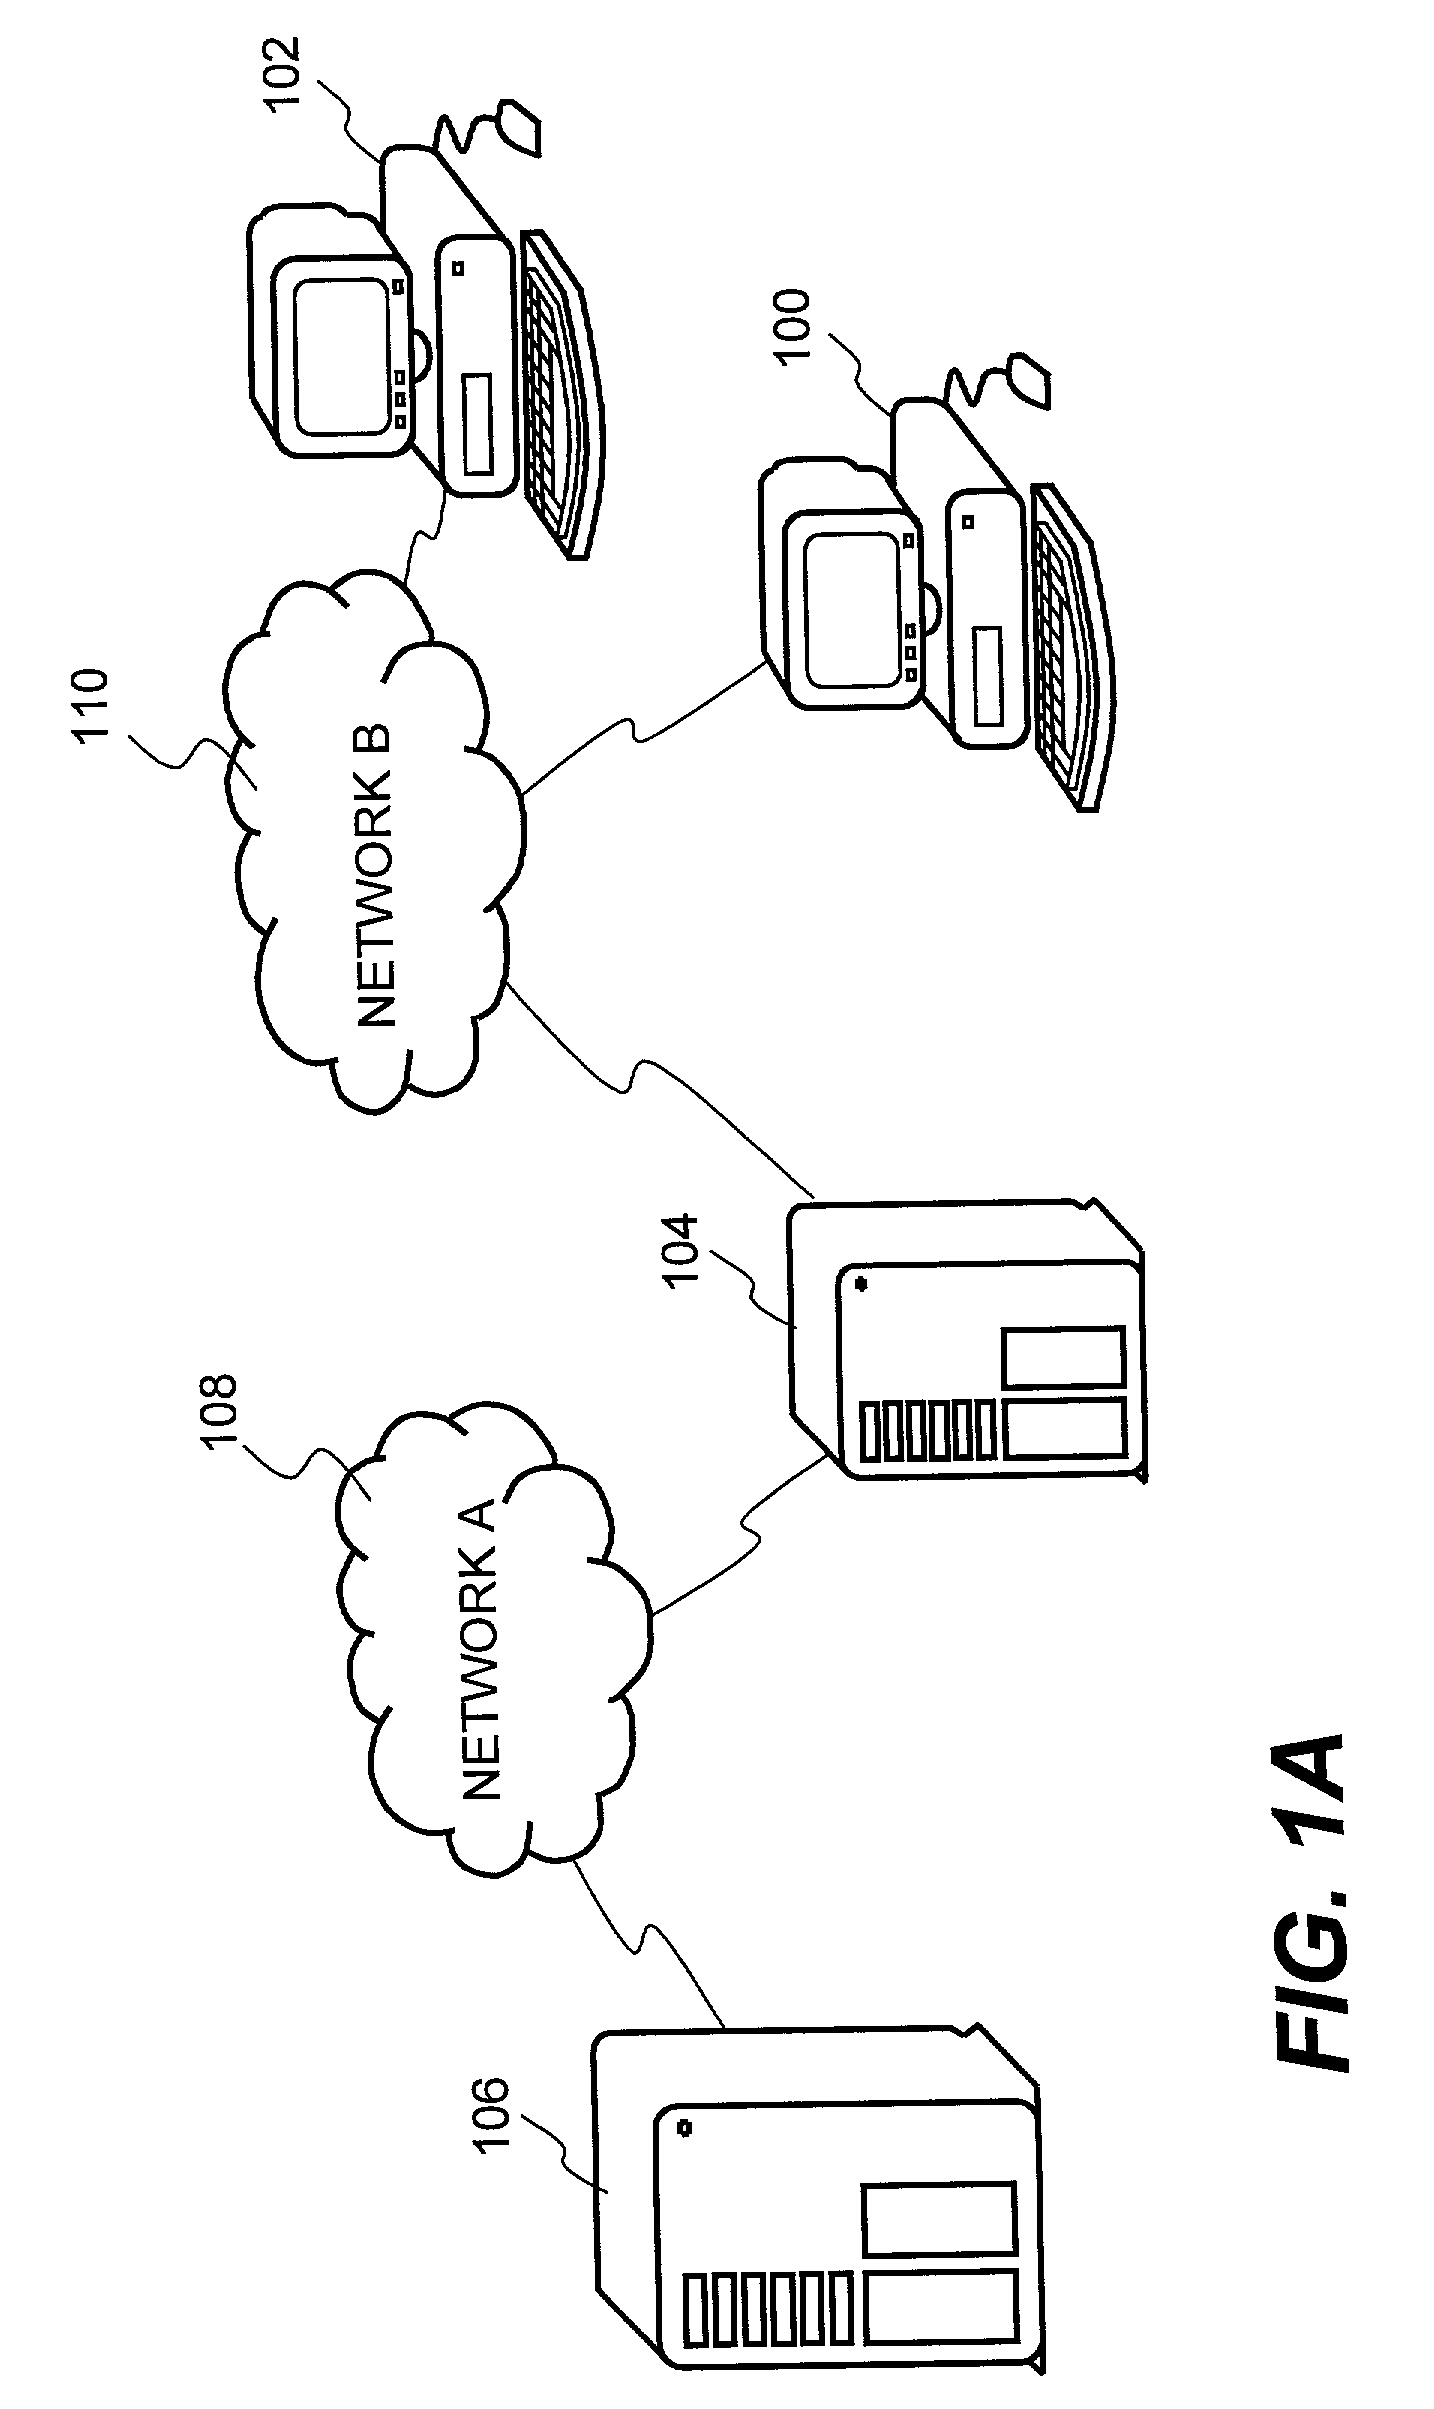 System and method for providing distributed access control to secured documents